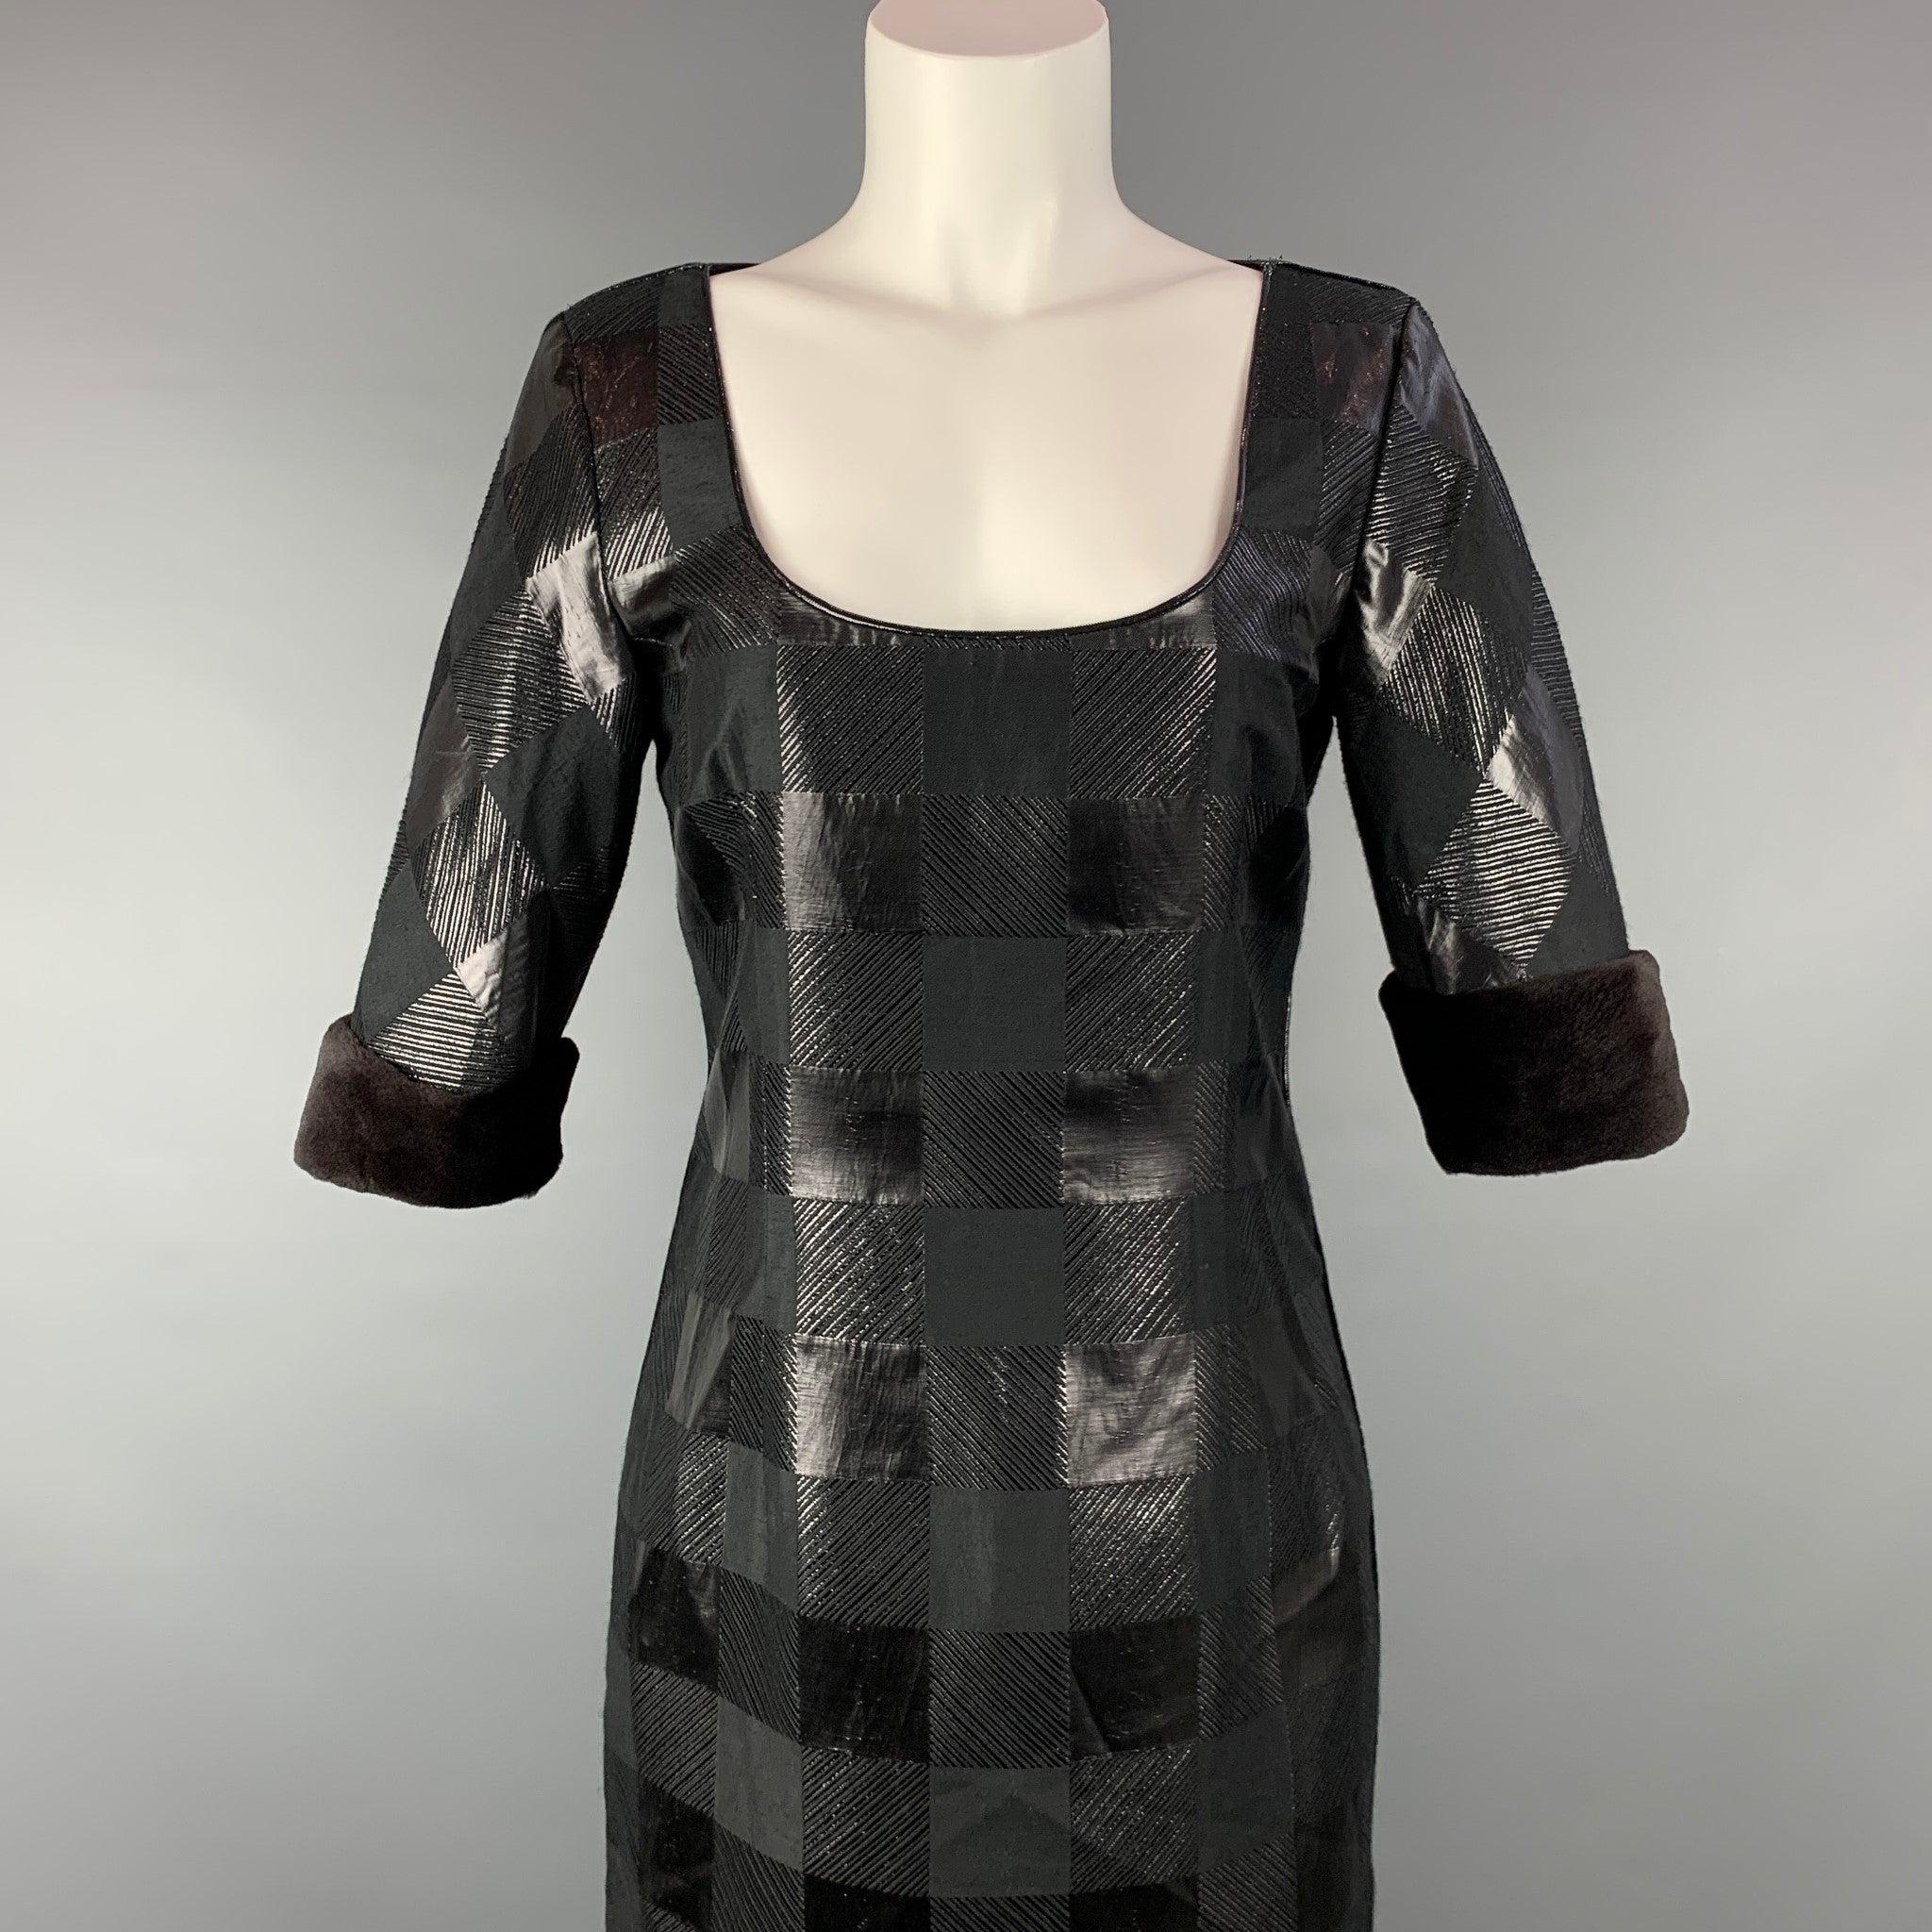 GIORGIO ARMANI cocktail dress comes in a black viscose blend with a purple liner featuring a shift style, fur trim, and a back zip up closure. Made in Italy. Very Good Pre-Owned Condition. 

Marked:  46 

Measurements: 
 
Shoulder: 16 inches Bust: